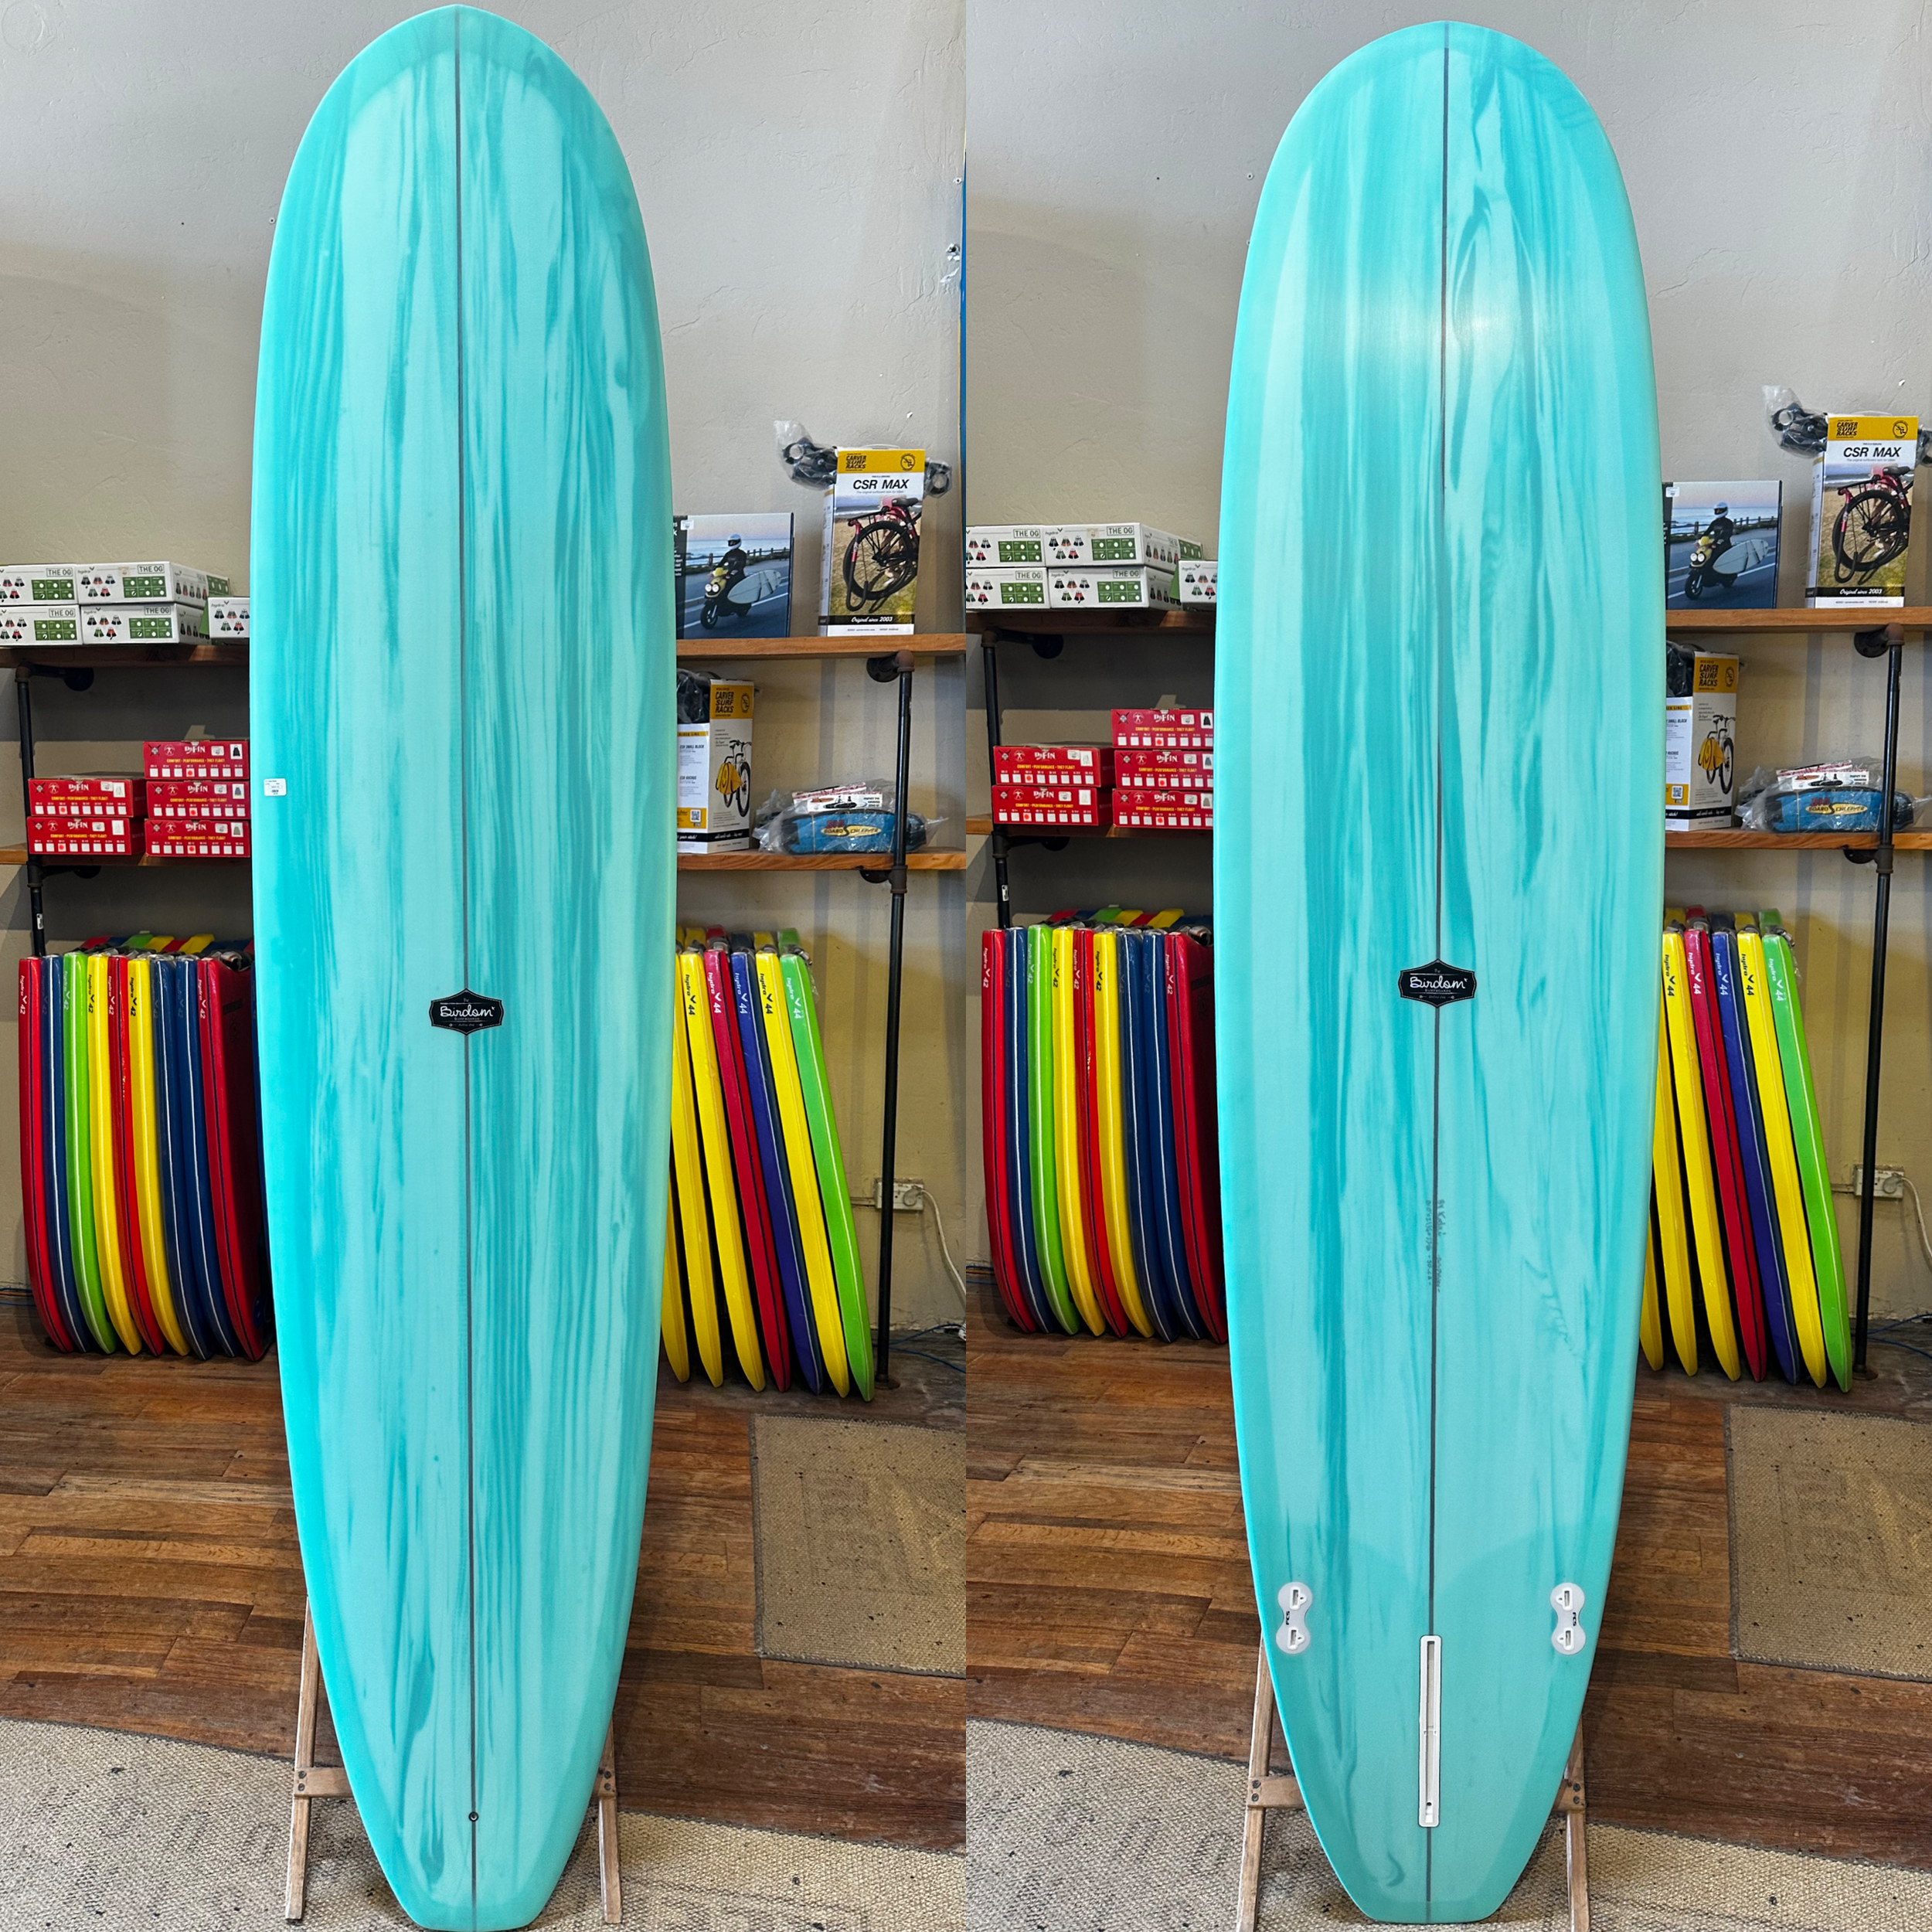 Birdom Surfboard - Handshaped Surfboards. Available to purchase at